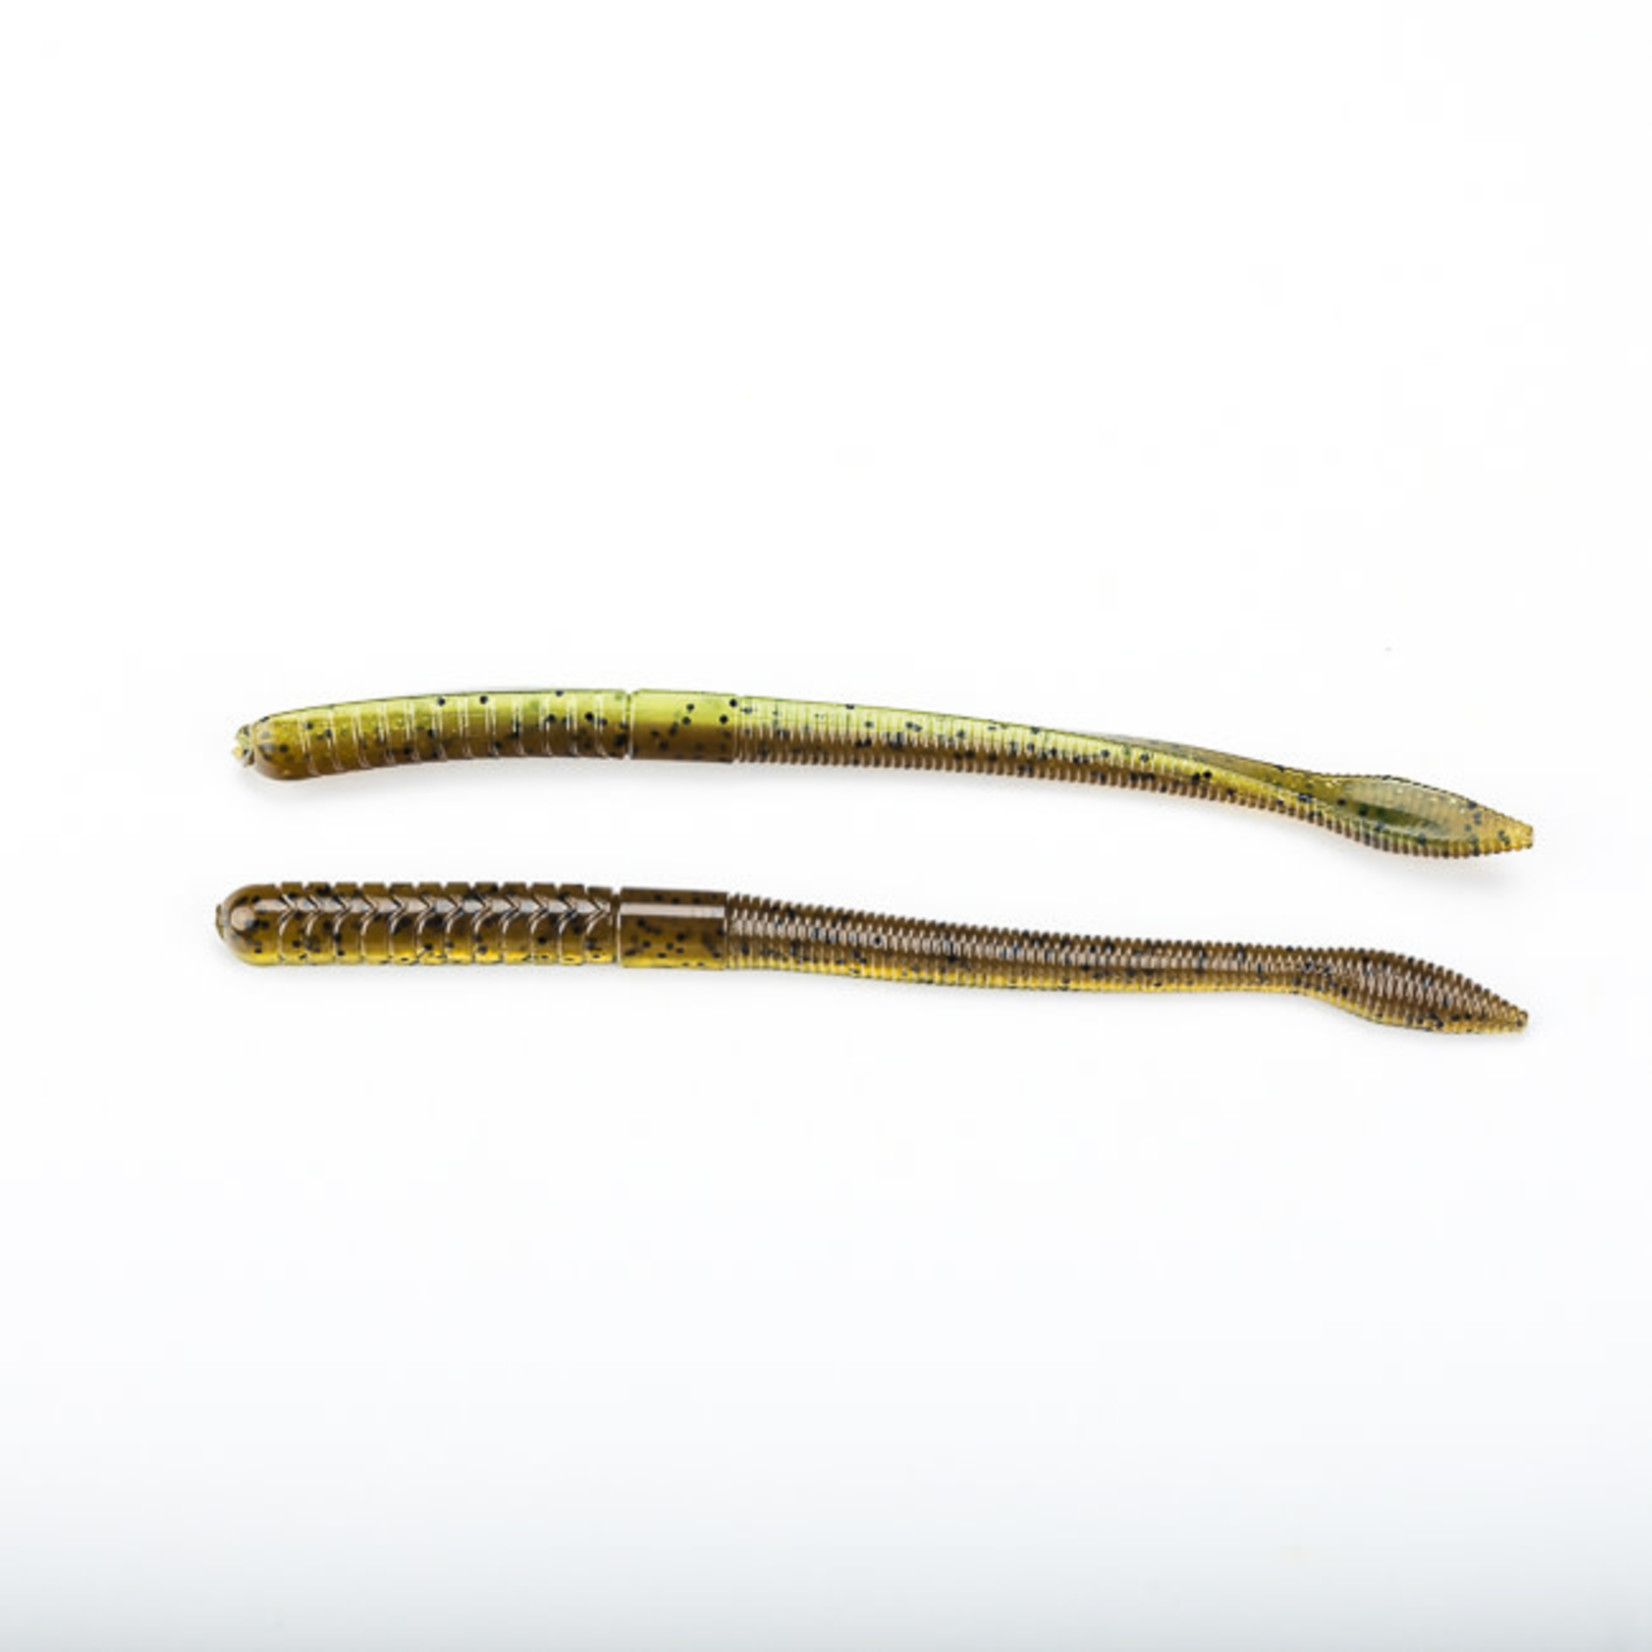 X-Zone X Zone 6" MB Fat Finesse Worm, Summer Craw, 8ea